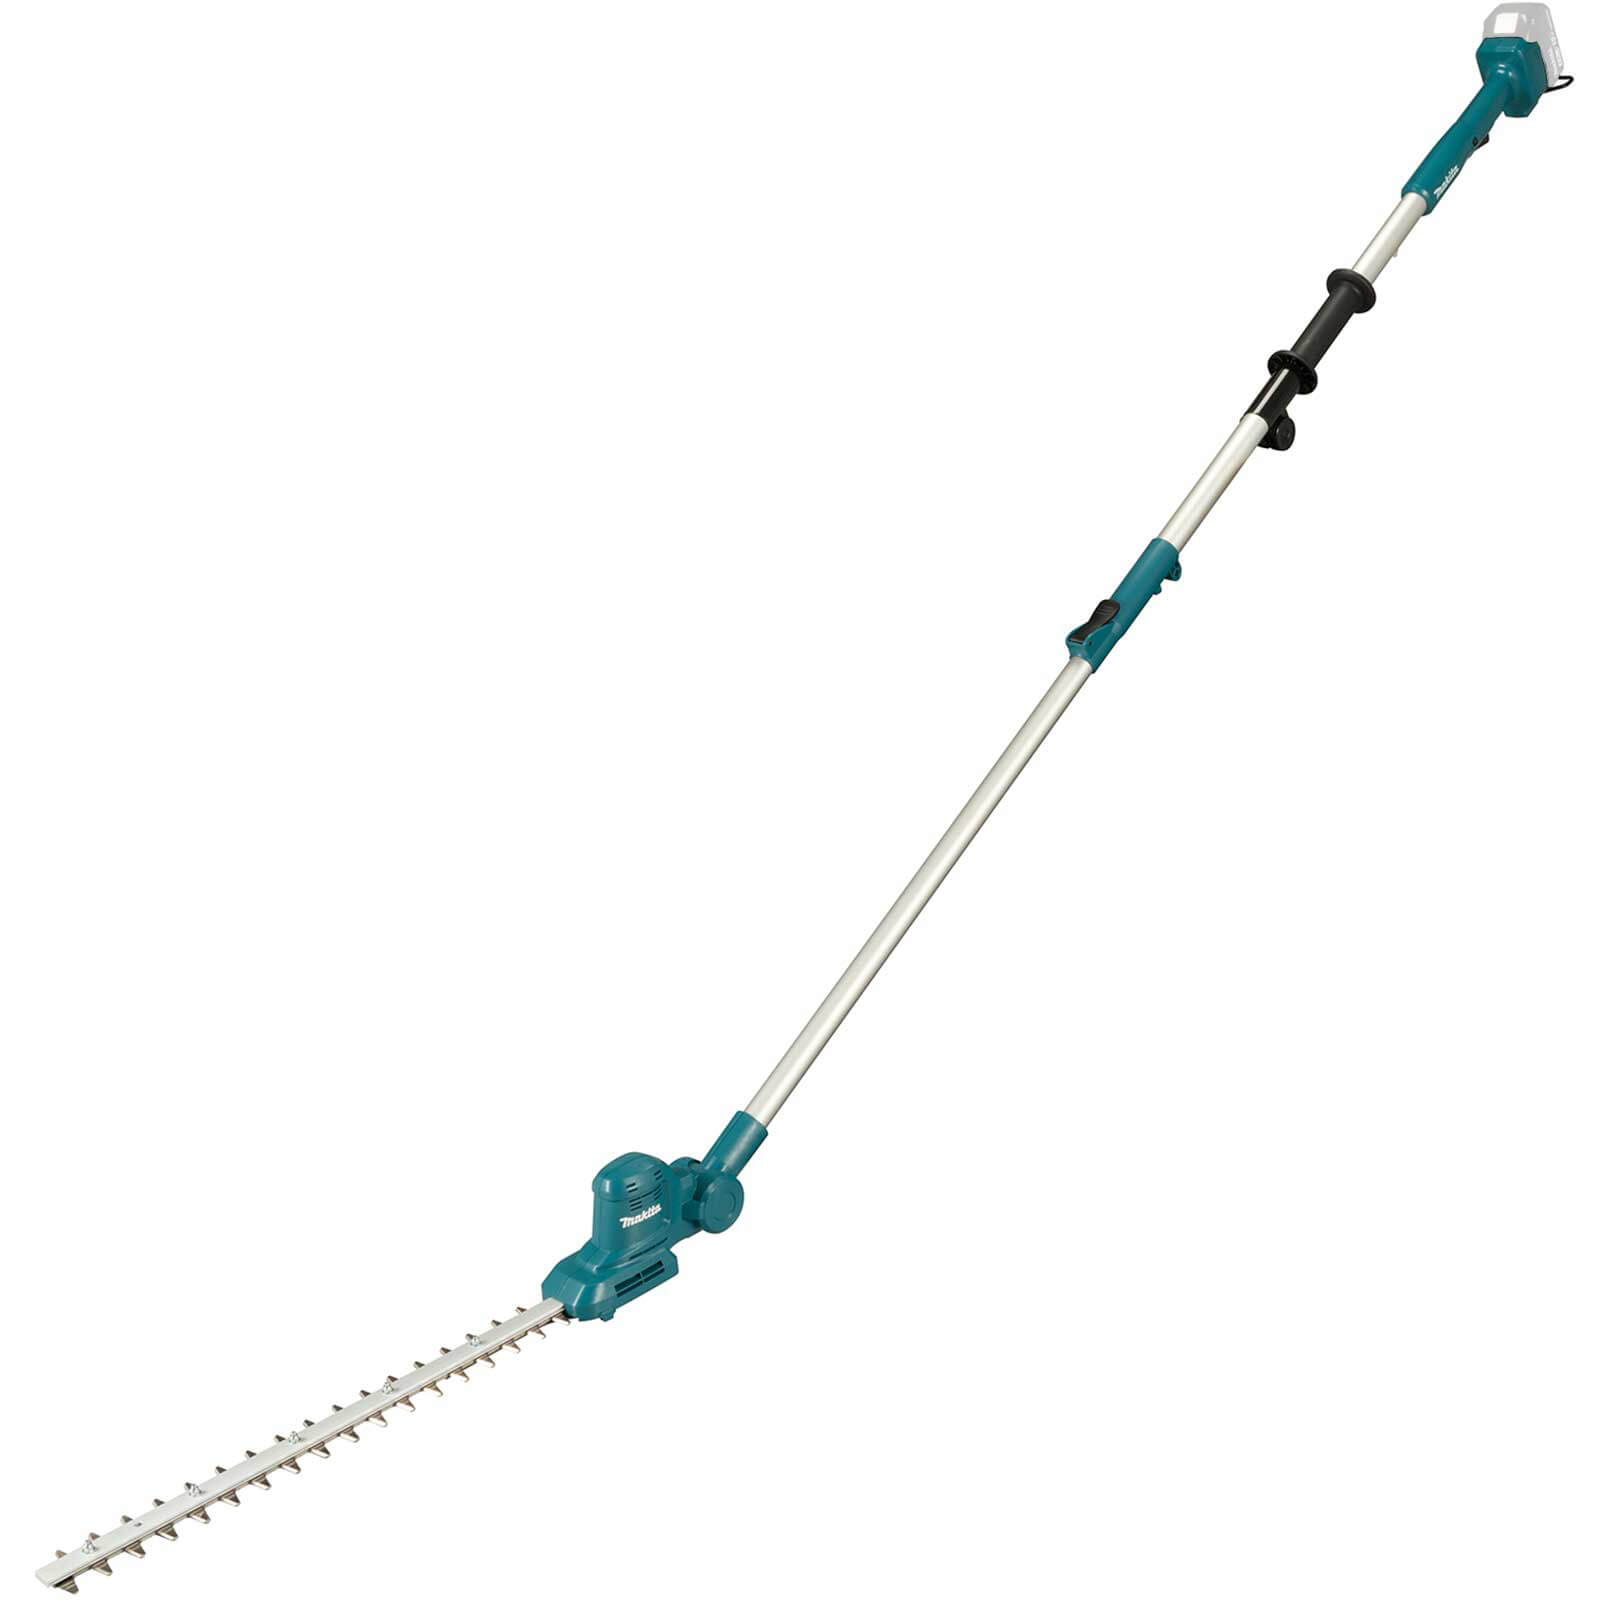 Makita DUN461W 18v LXT Cordless Telescopic Pole Hedge Trimmer 460mm No Batteries No Charger